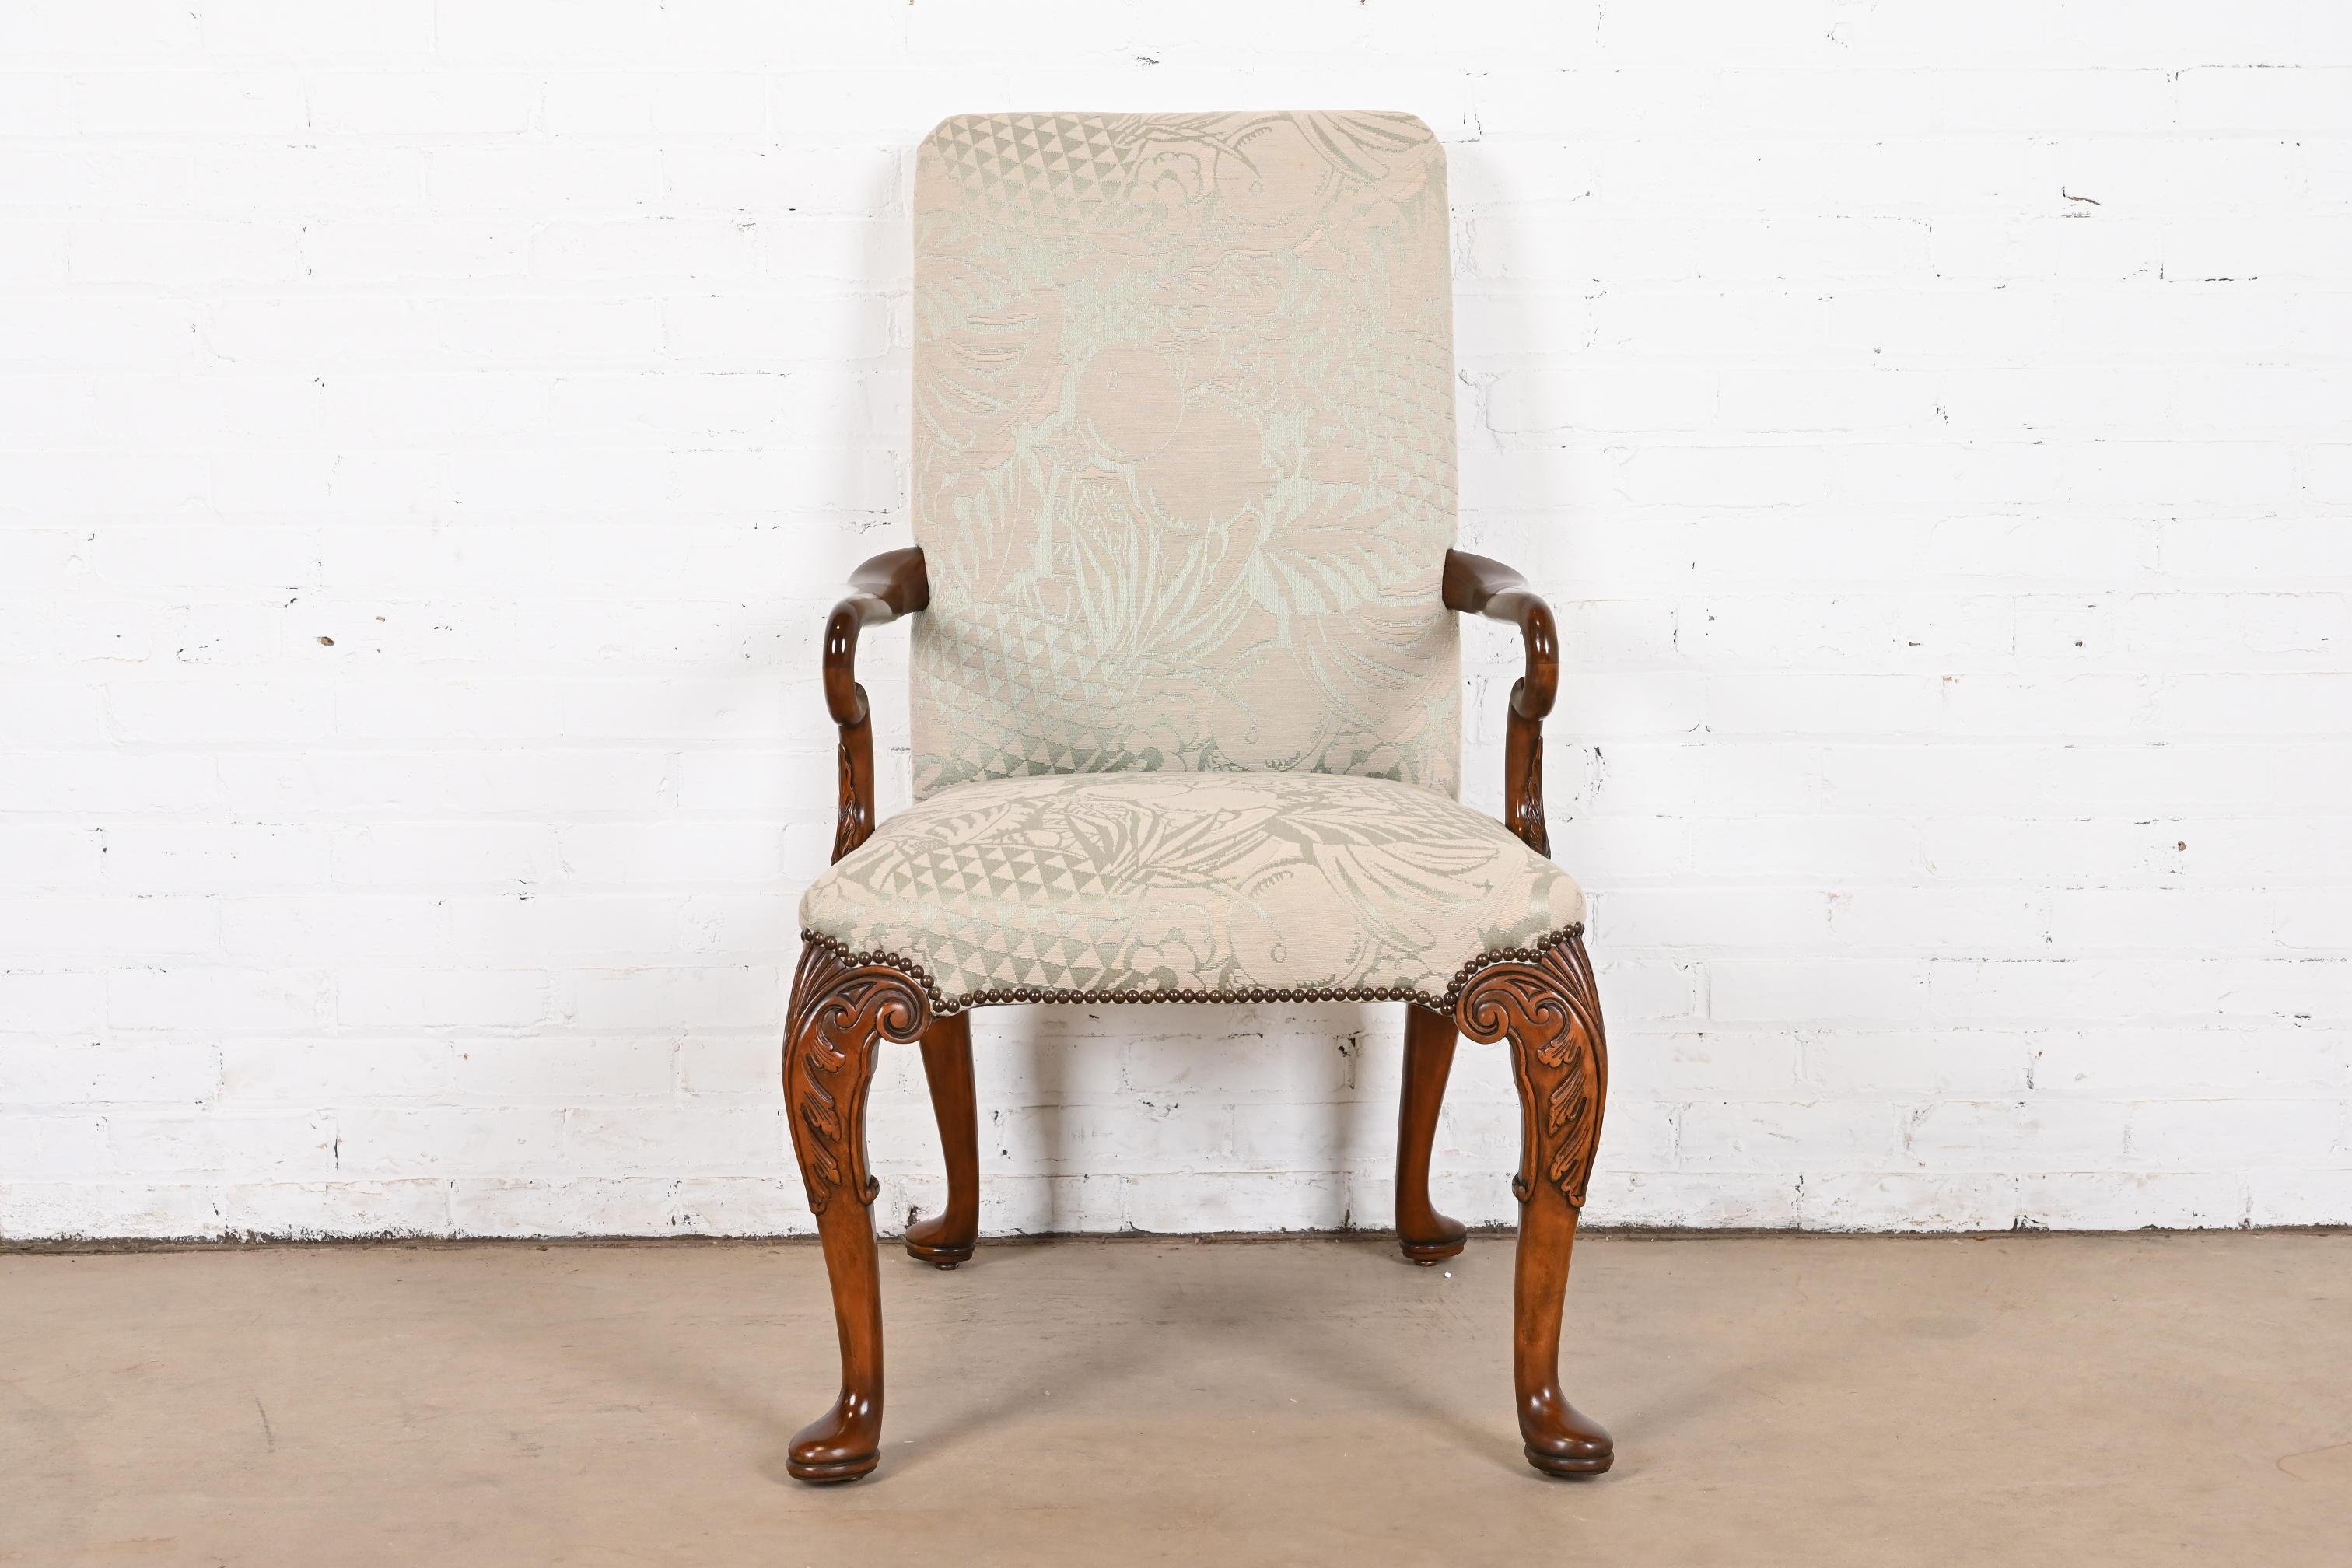 A beautiful Georgian, Chippendale, or Queen Anne style arm chair or lounge chair

By Baker Furniture

USA, Circa 1980s

Carved mahogany frame, with brass studded fruit patterned upholstery.

Measures: 24.5